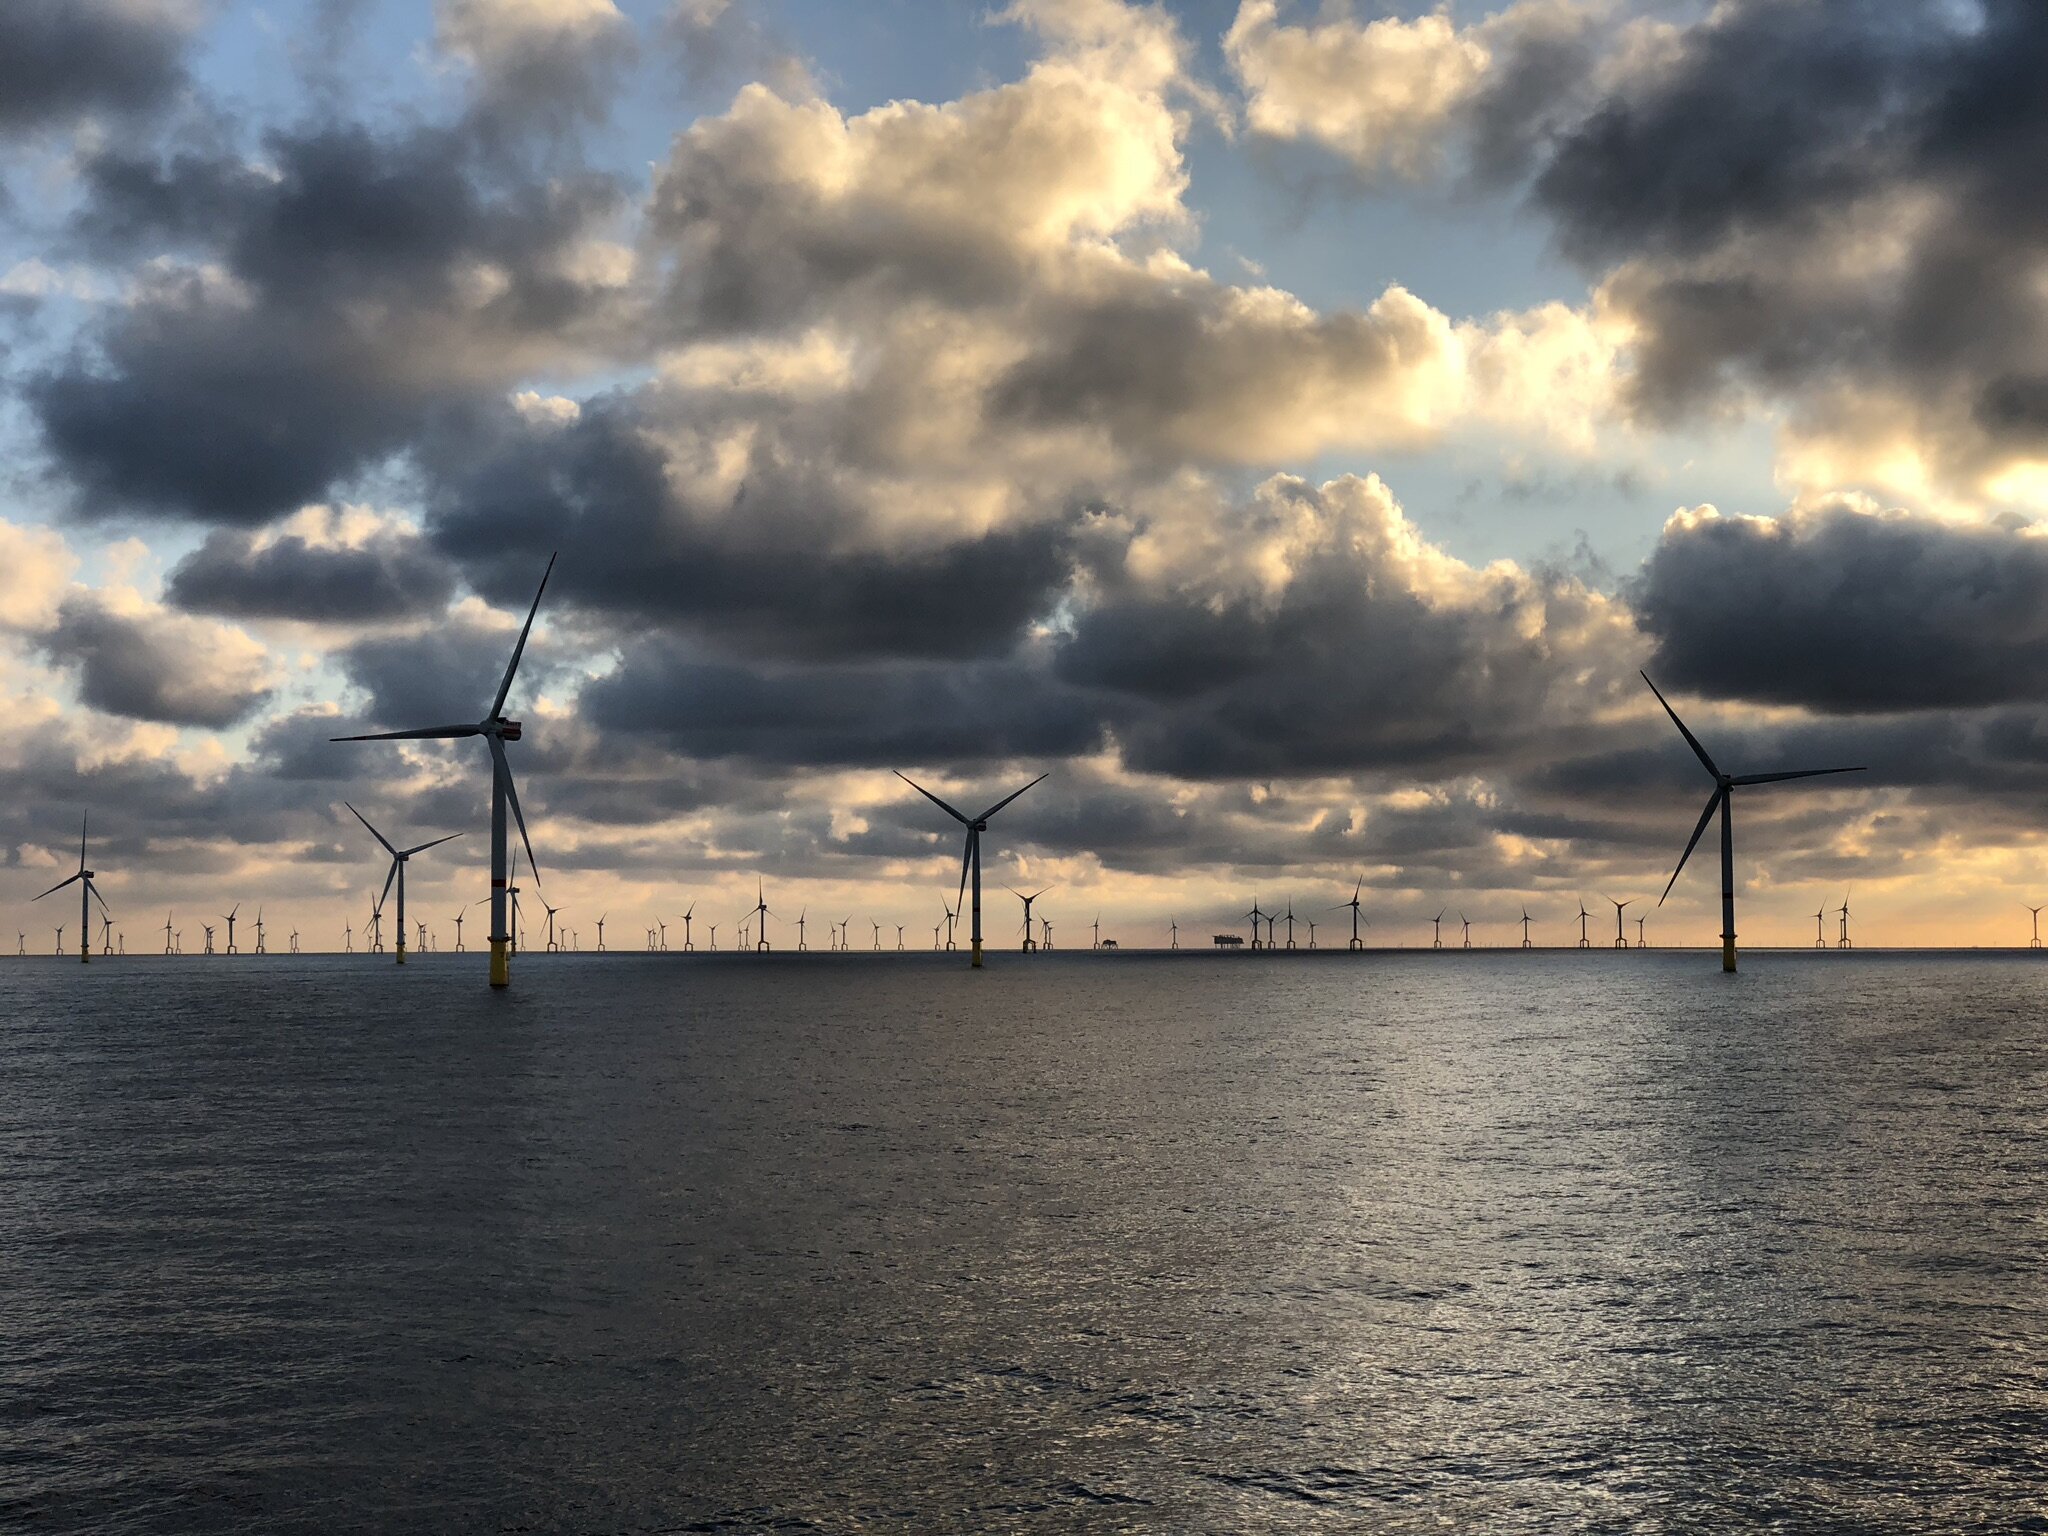 For the second time in a row - Best Offshore Windpark 2020